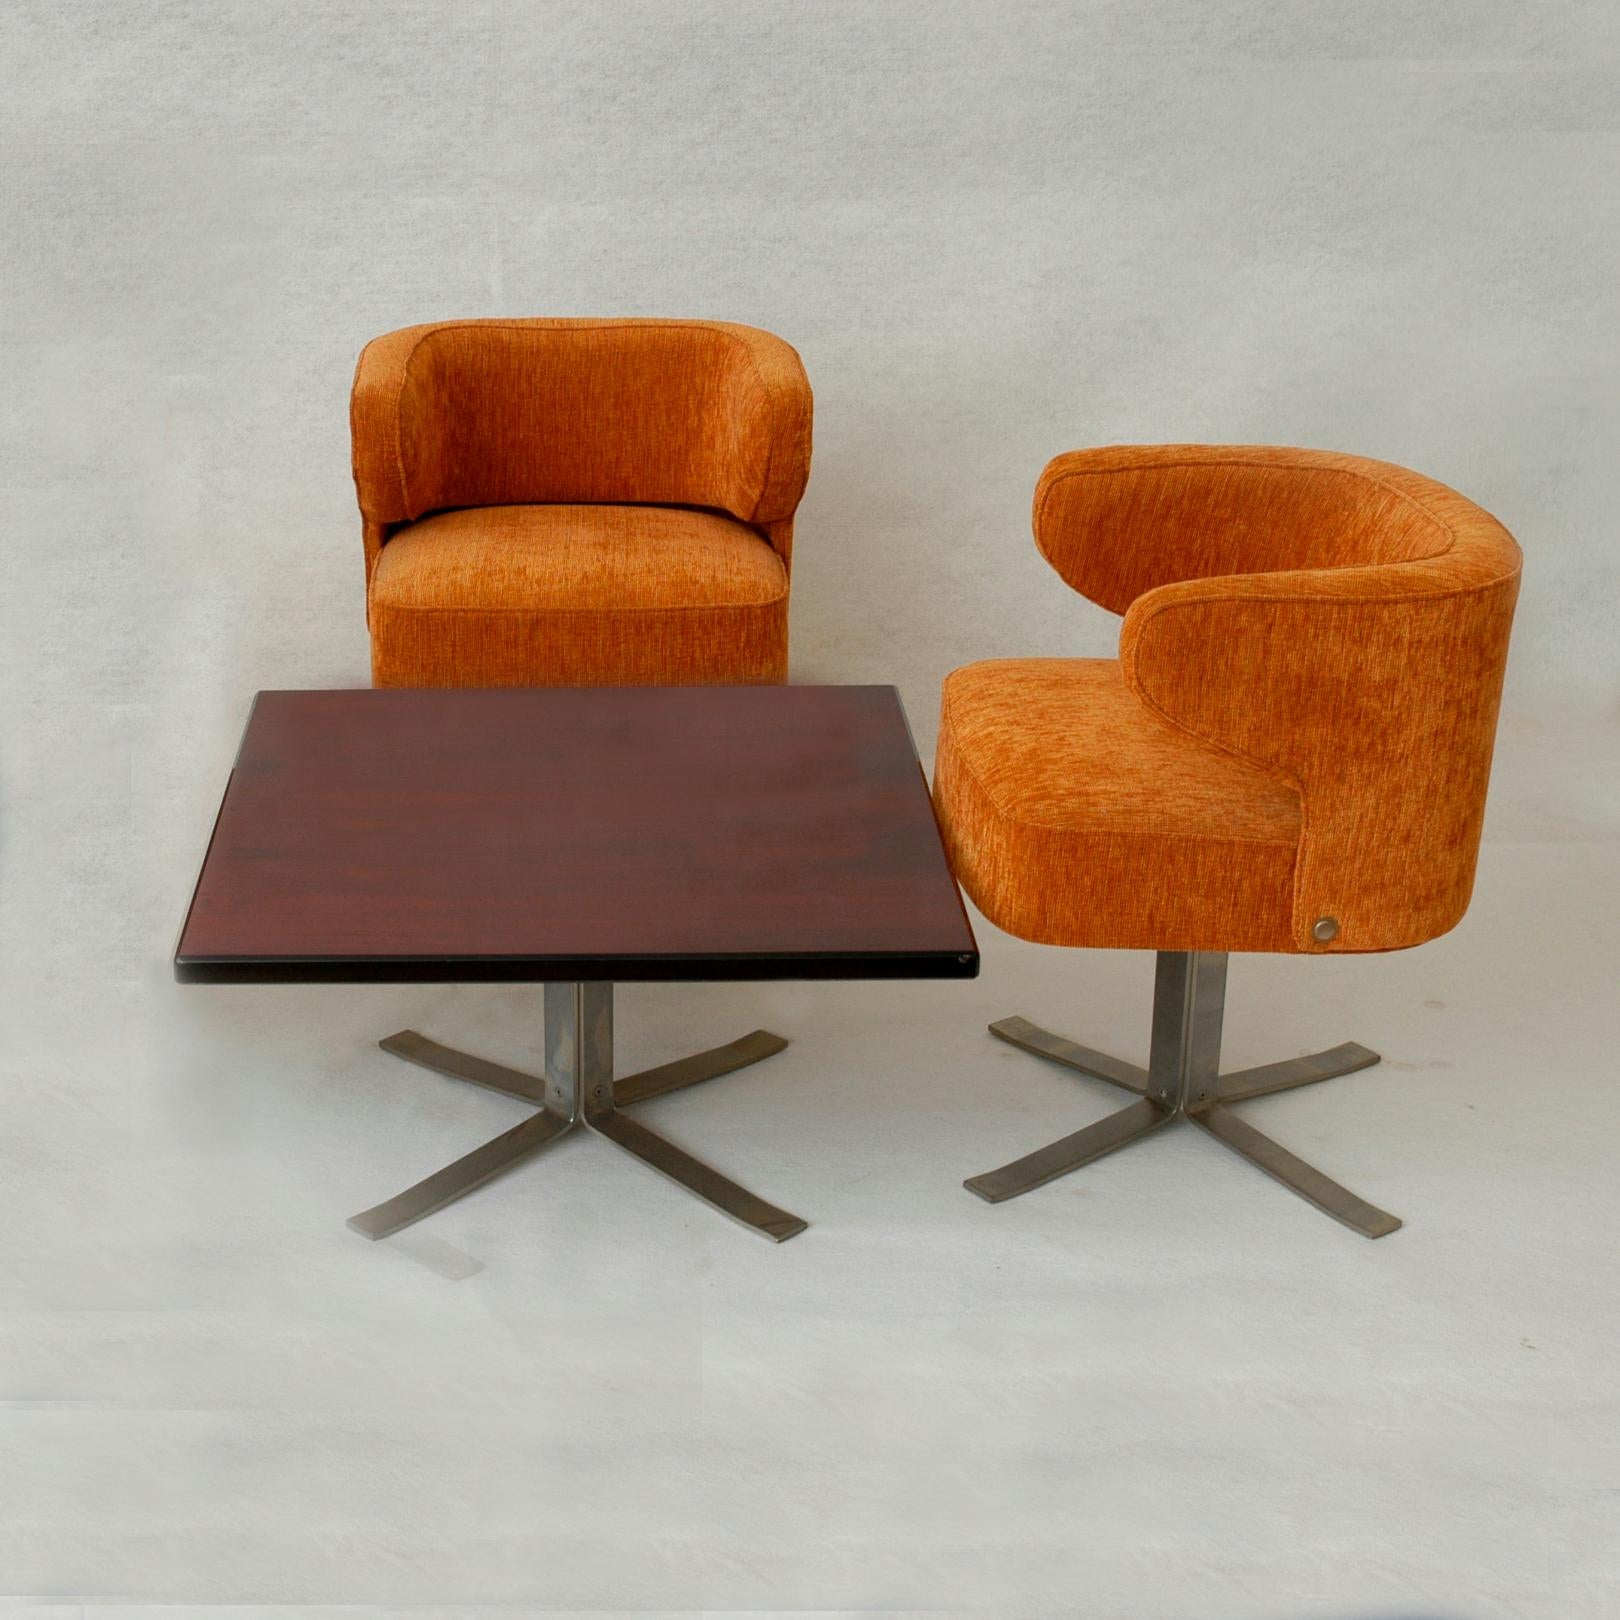 This set was designed by Gianni Moscatelli and produced by Formanova in 1970s. The frame is made from brushed steel and the armchairs have been reupholstered with orange high quality fabric some years ago.
Please note that sizes given in dimensions